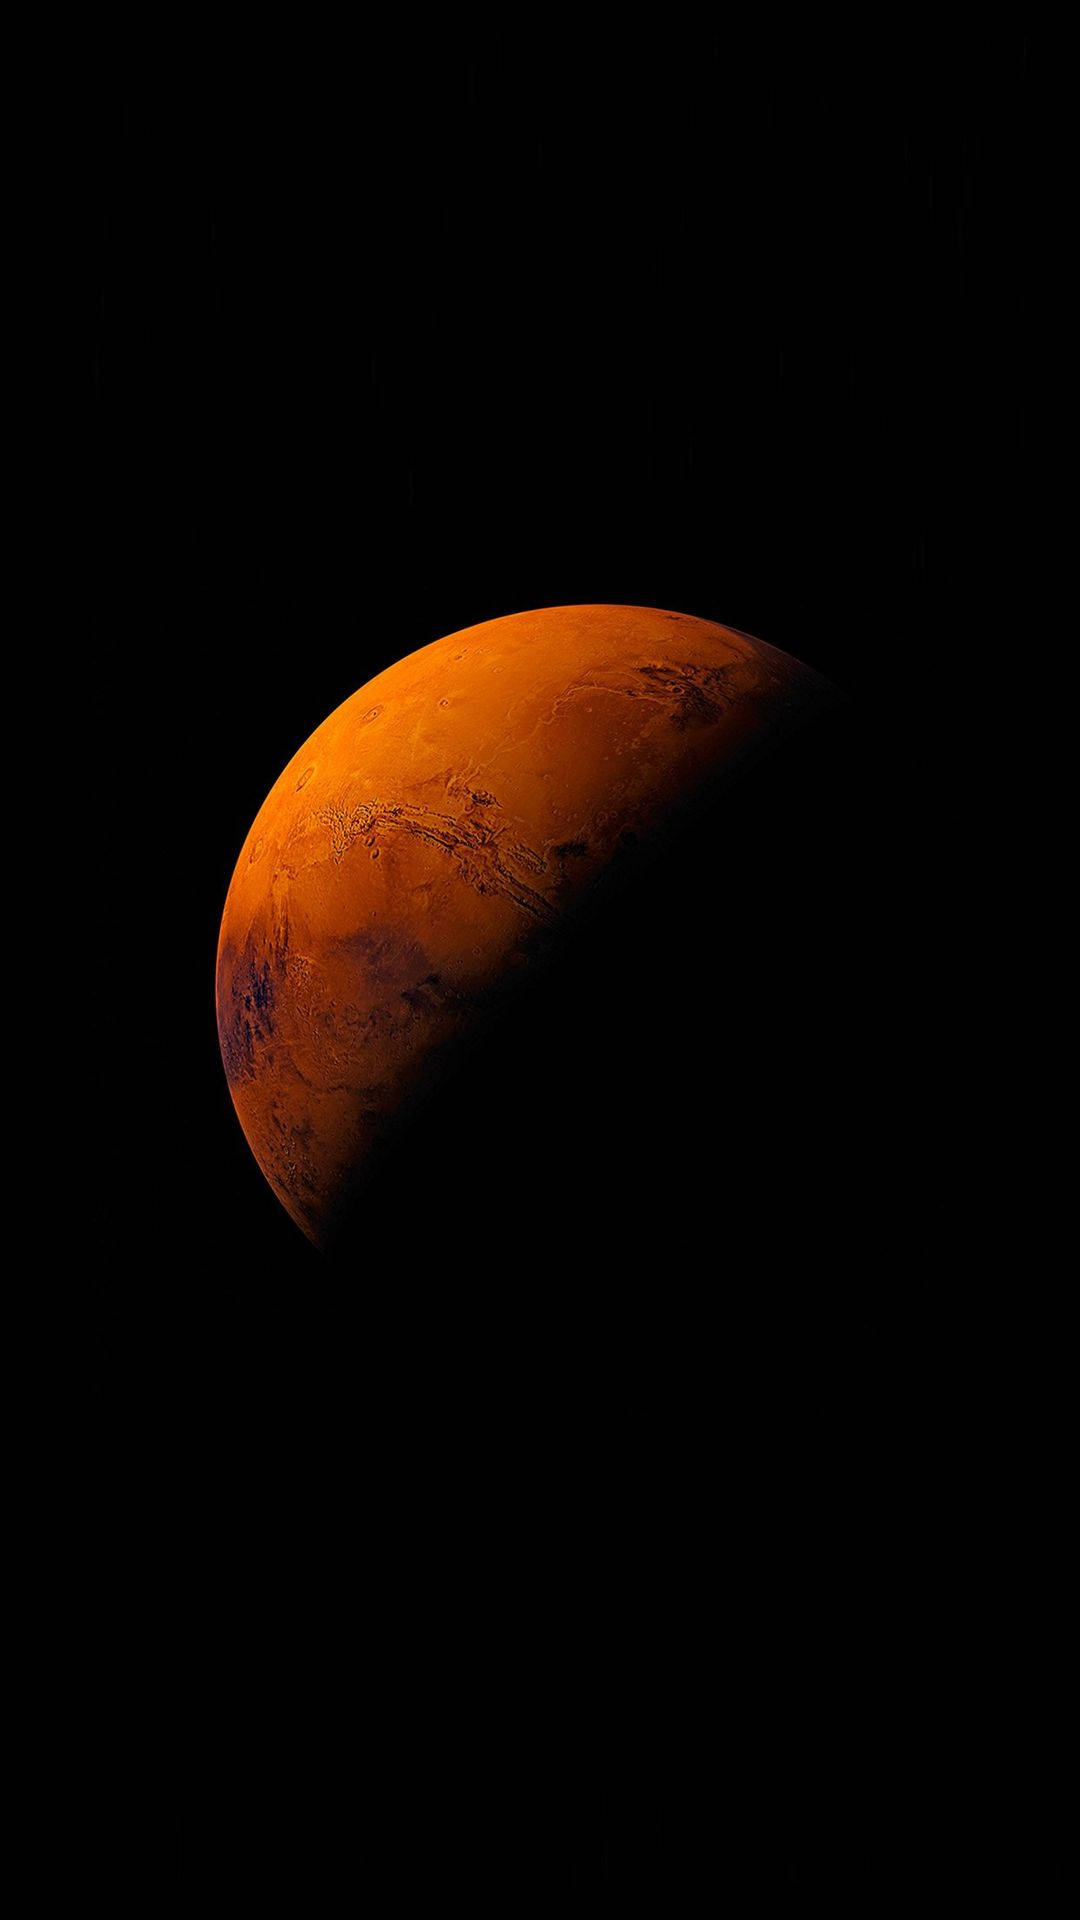 Welcome to the future of smart phones - the Mars Iphone! Wallpaper